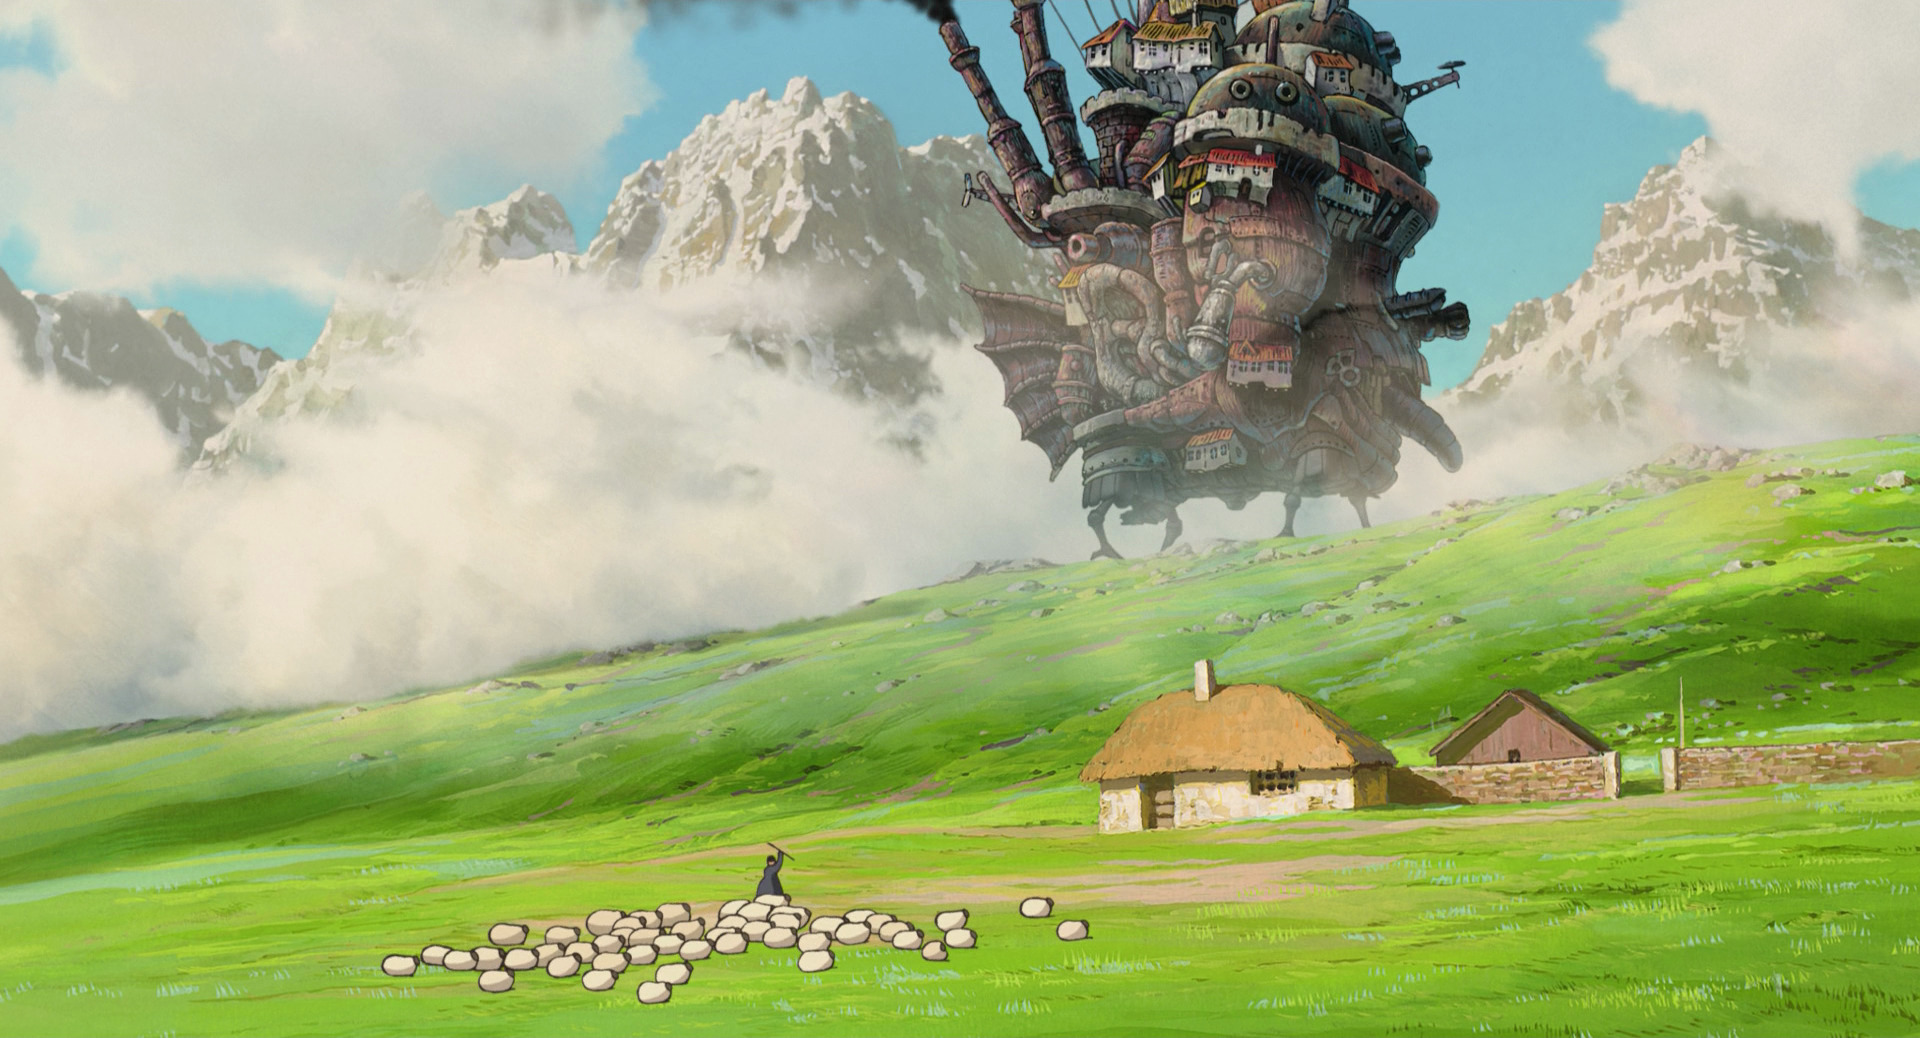 Anime Howls Moving Castle Wallpaper 1920x1080 hd, picture, image